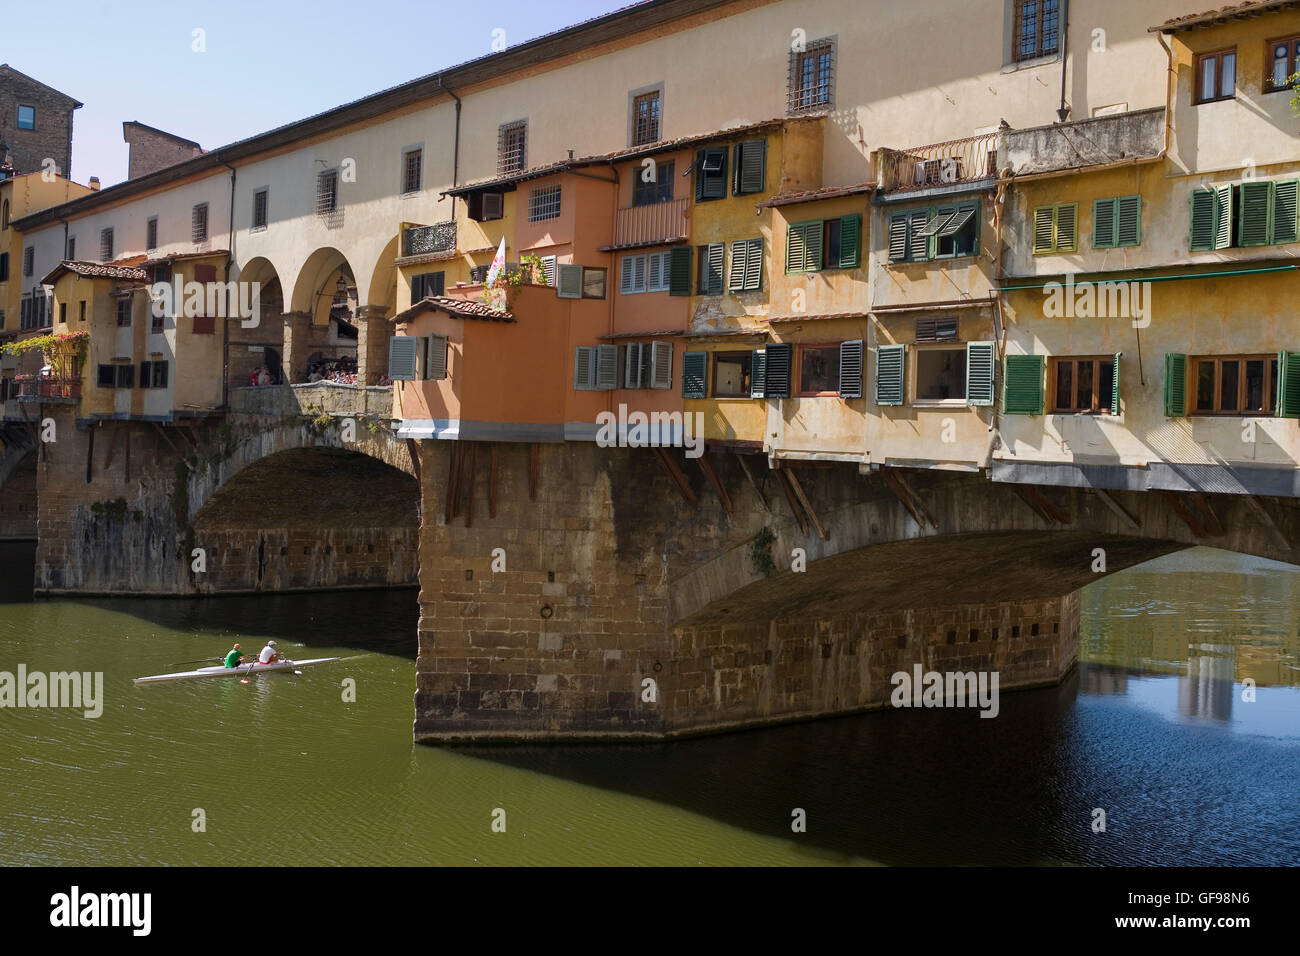 Close-up of the Ponte Vecchio spanning the River Arno in Florence Tuscany, Italy, with a double scull shooting the bridge Stock Photo